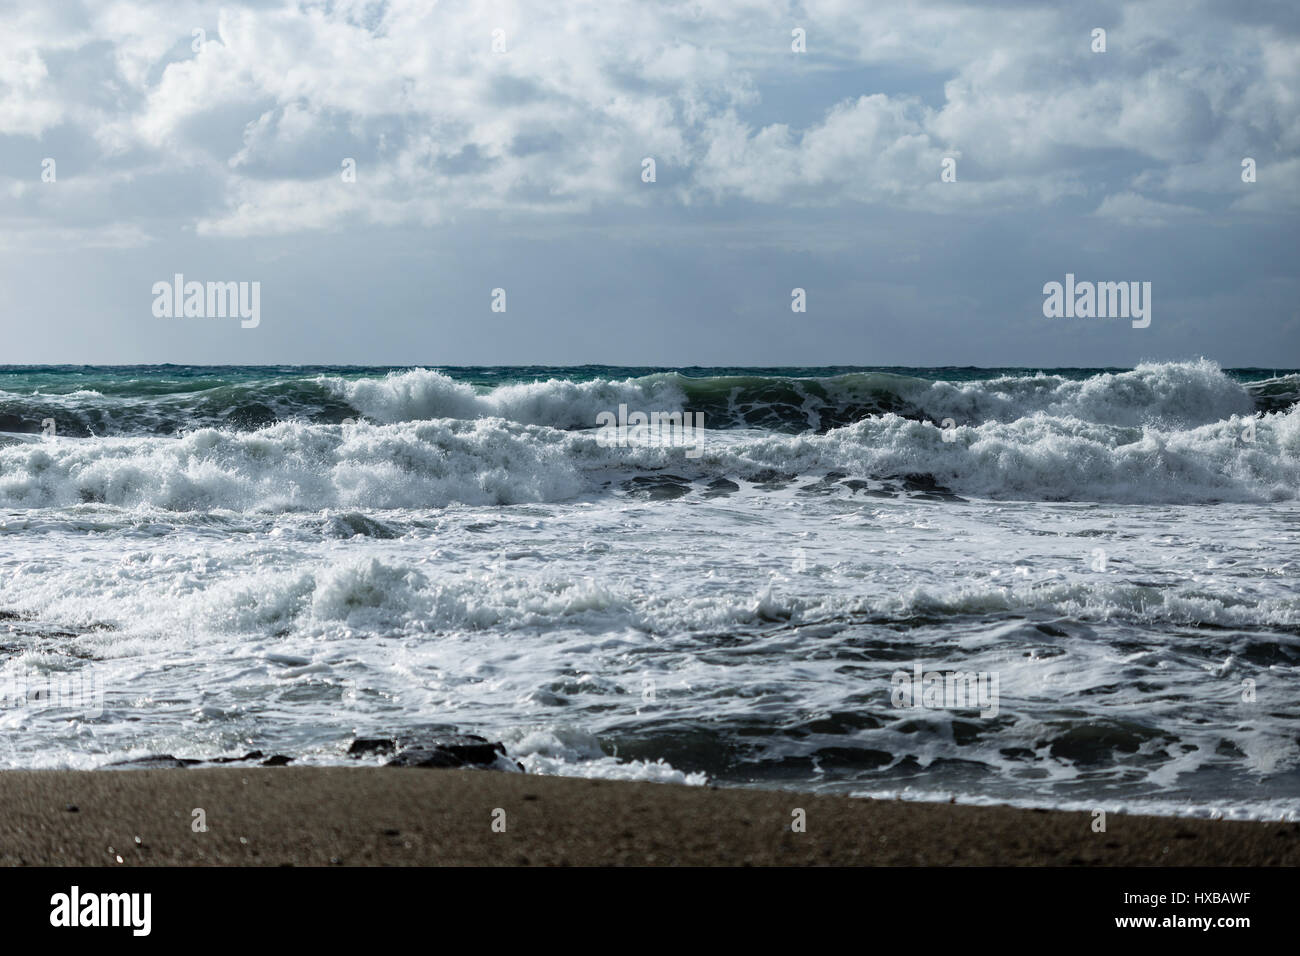 seascape showing powerful waves shot on cloudy day landscape layout Stock Photo